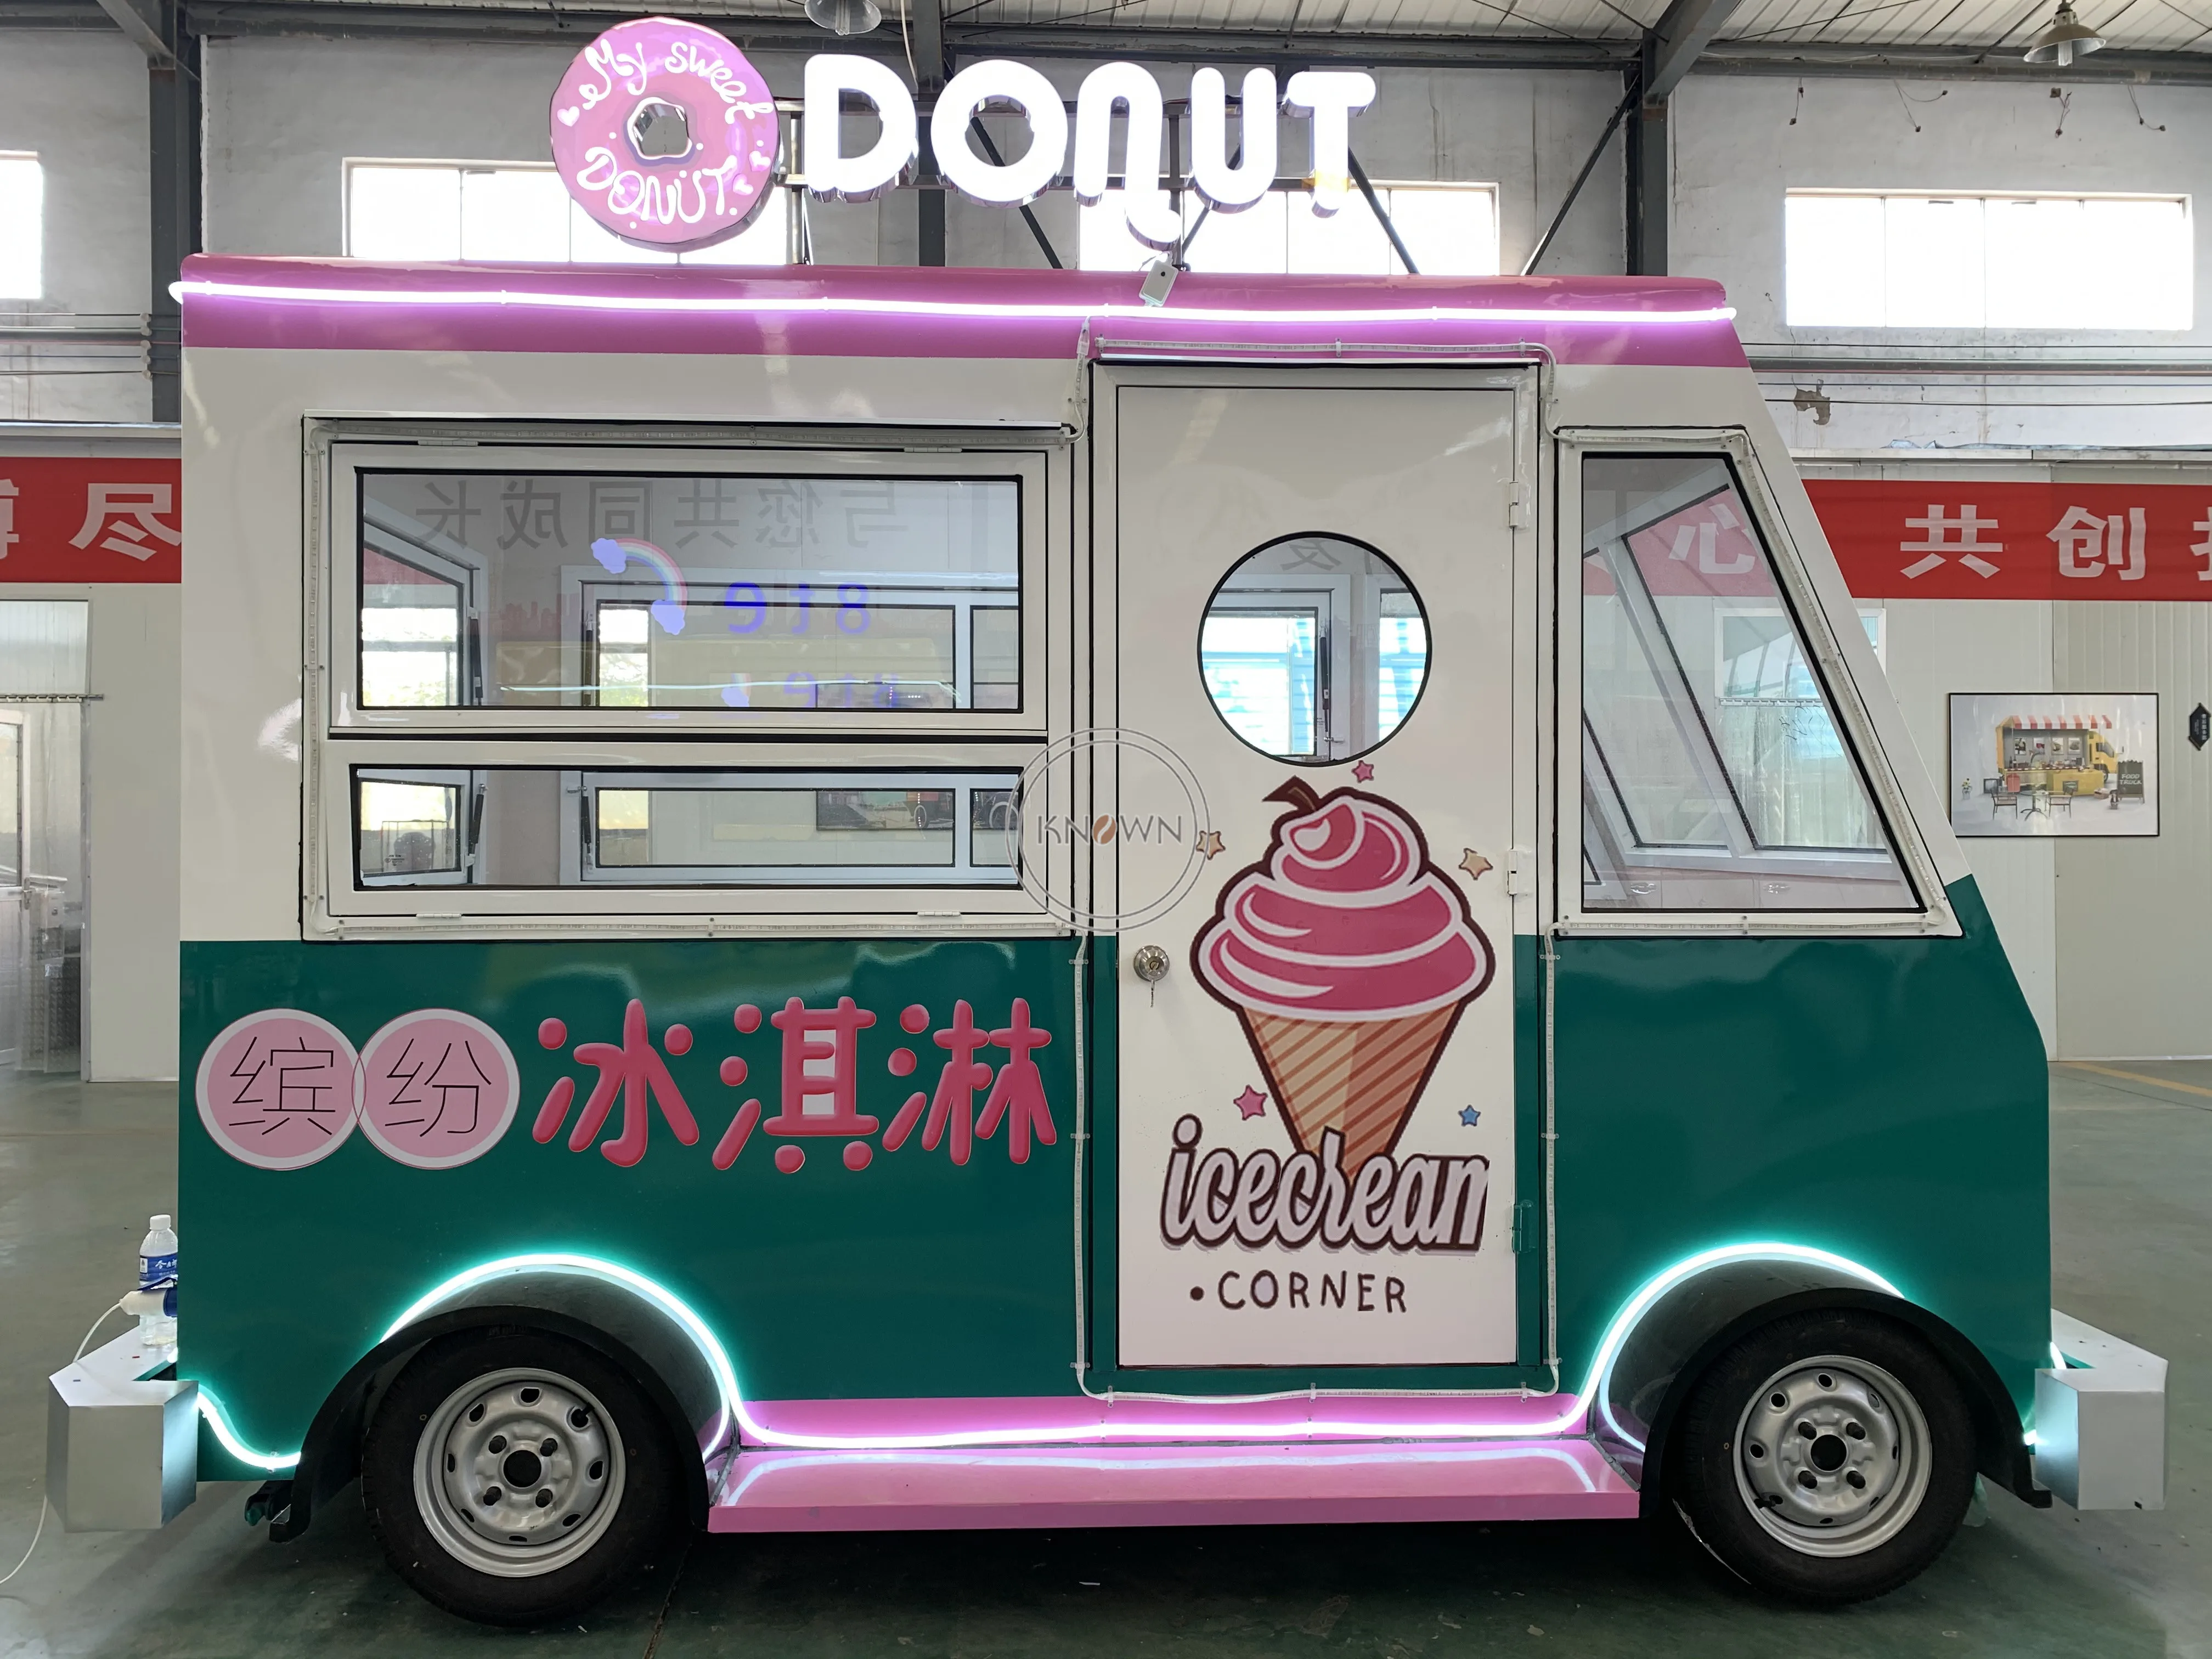 

2023 Hot Sell Snack Cart Mobile Food Truck With Milk Tea Coffee Fried ice cream Trailer Kiosk Van Car Customized Logo Color